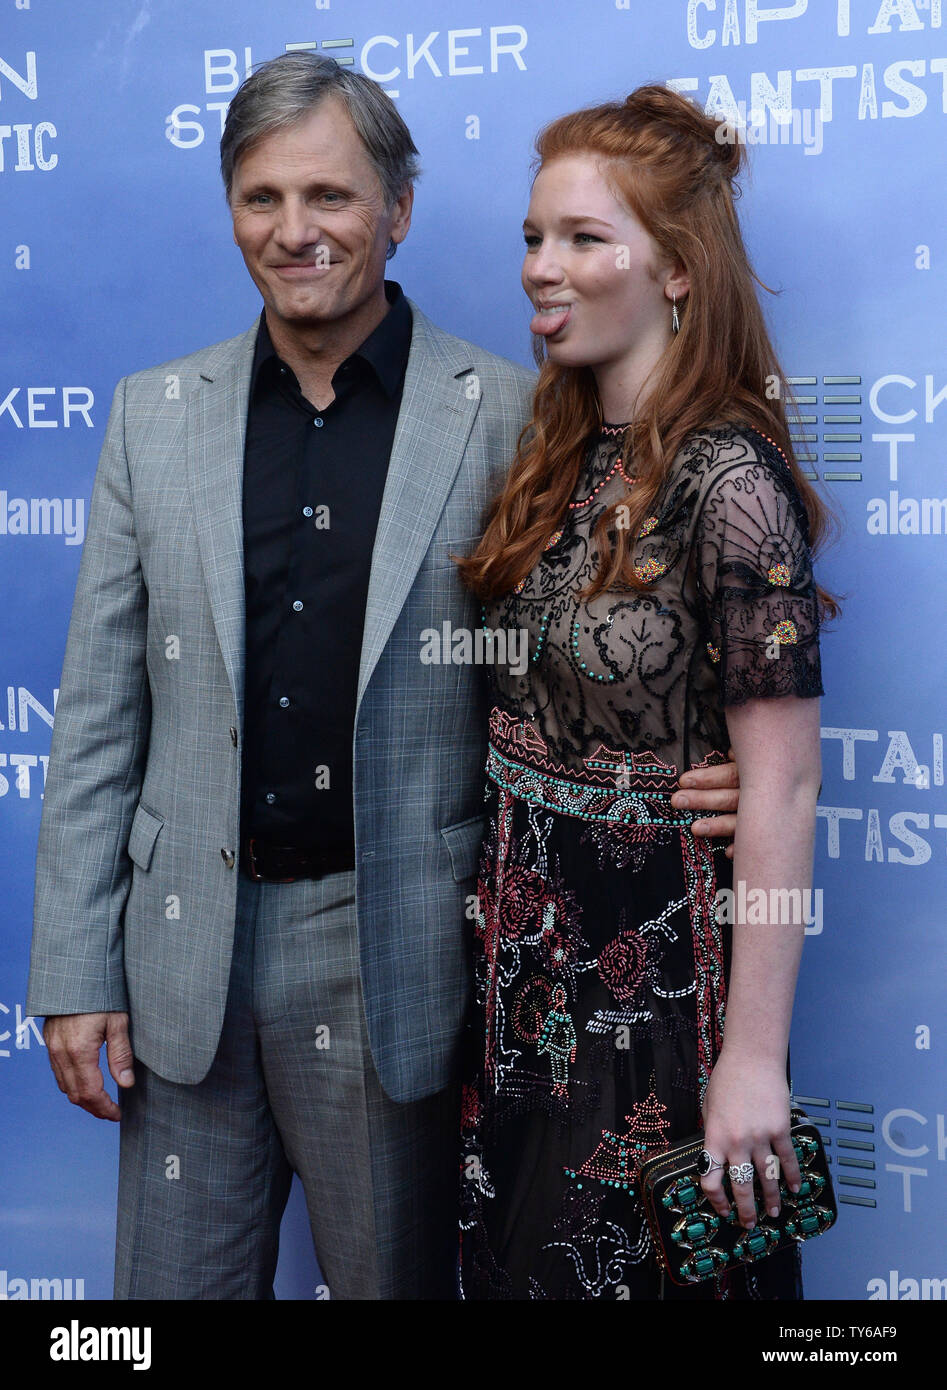 Cast members Viggo Mortensen (L) and Annalise Basso attend the premiere of the motion picture drama 'Captain Fantastic' at the Harmony Gold Theatre in the Hollywood section of Los Angeles on June 26, 2016. Storyline: In the forests of the Pacific Northwest, a father devoted to raising his six kids with a rigorous physical and intellectual education is forced to leave his paradise and enter the world, challenging his idea of what it means to be a parent.  Photo by Jim Ruymen/UPI Stock Photo